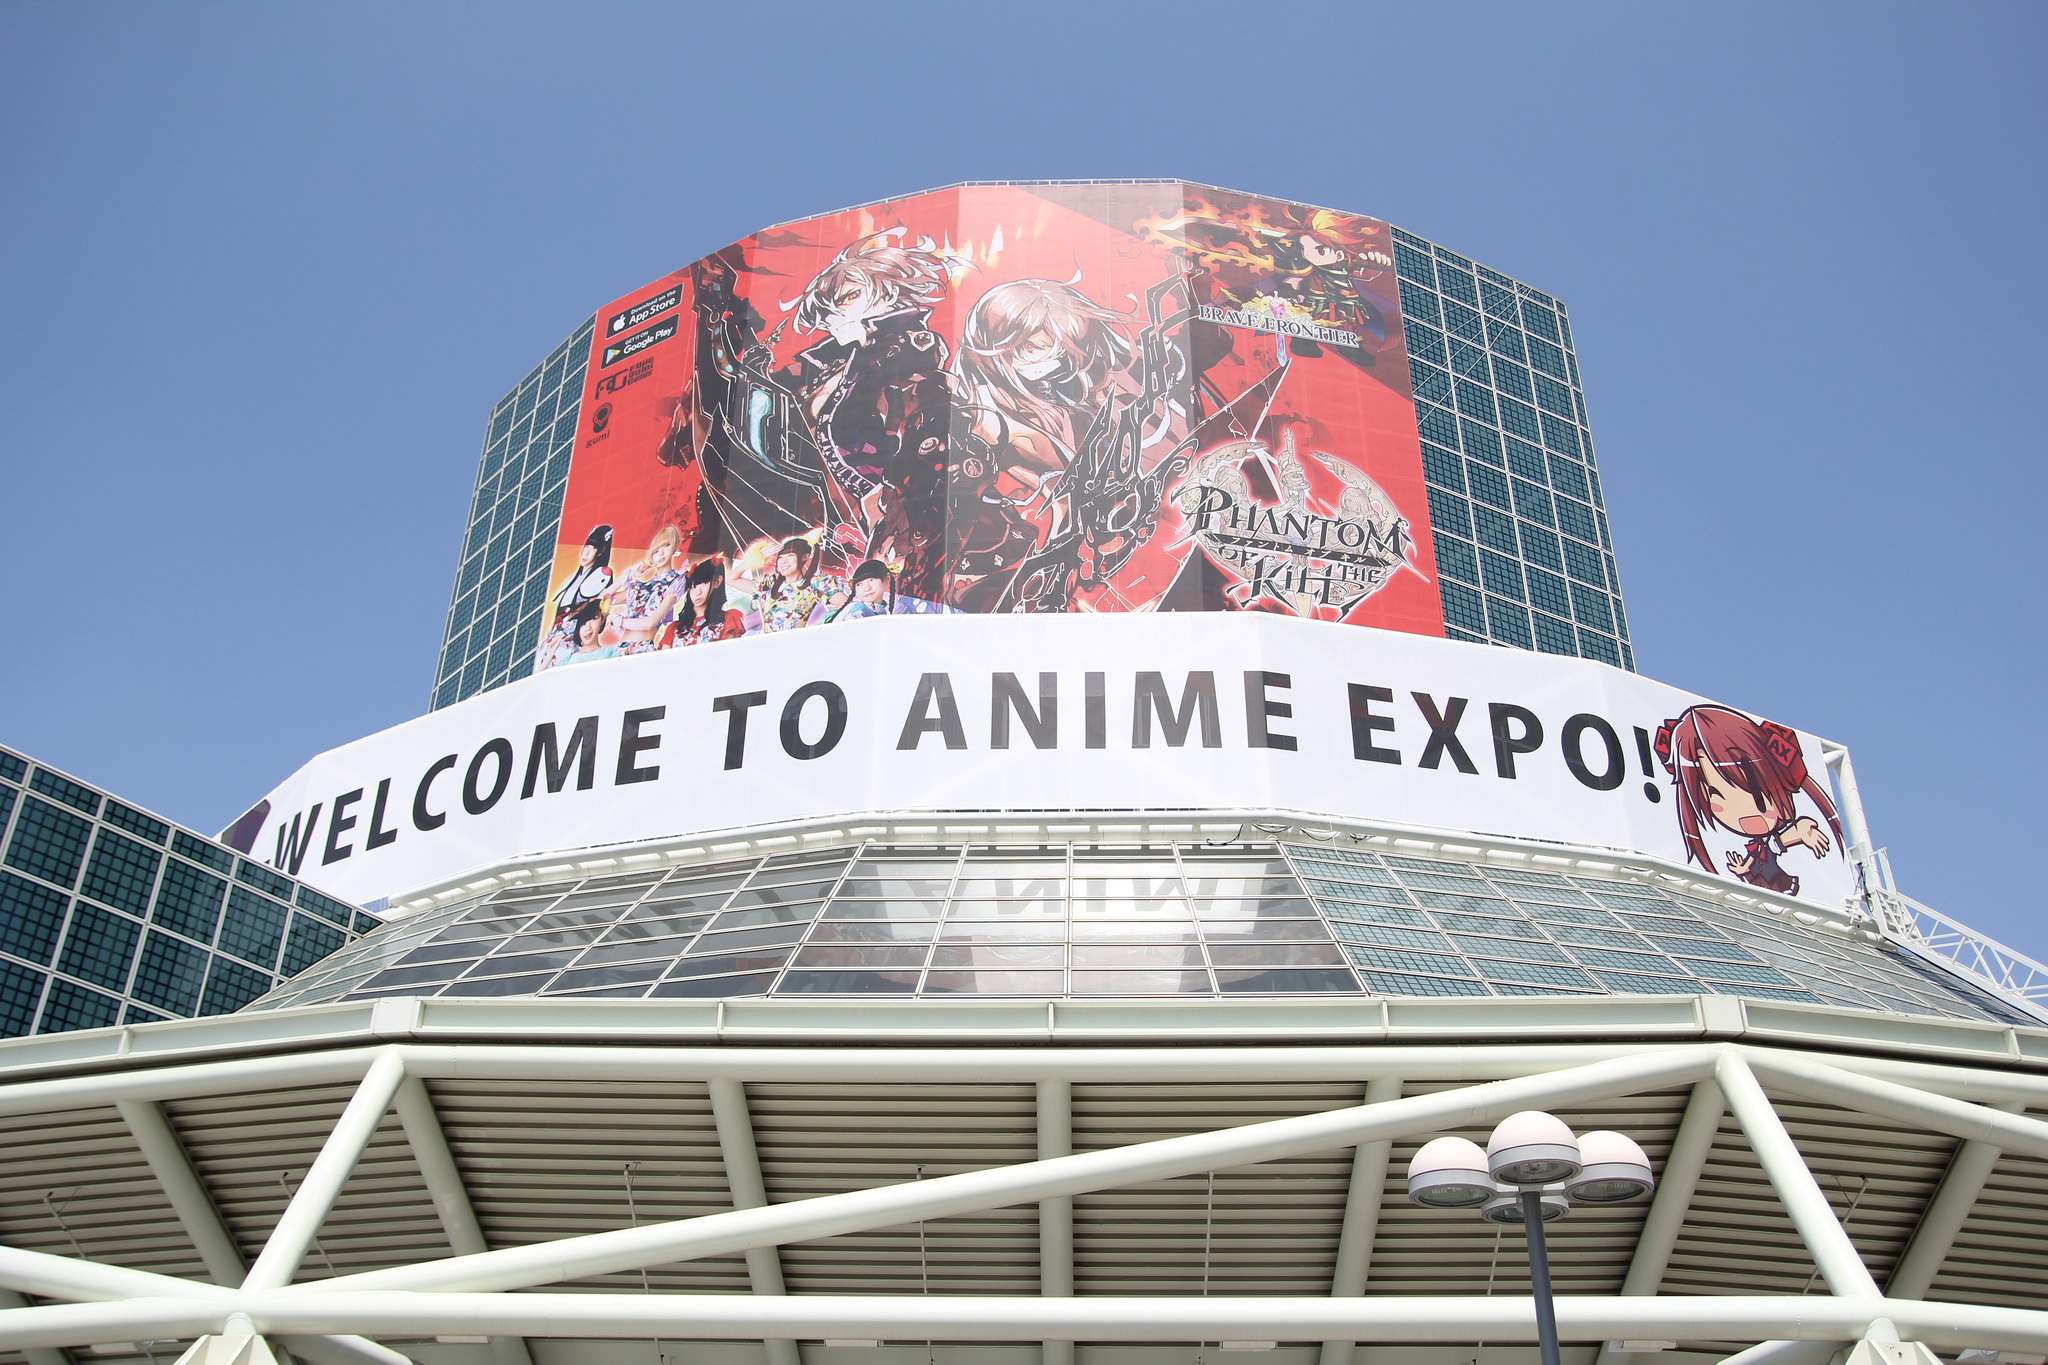 ax20163 Anime Expo 2016 in Los Angeles Convention Center